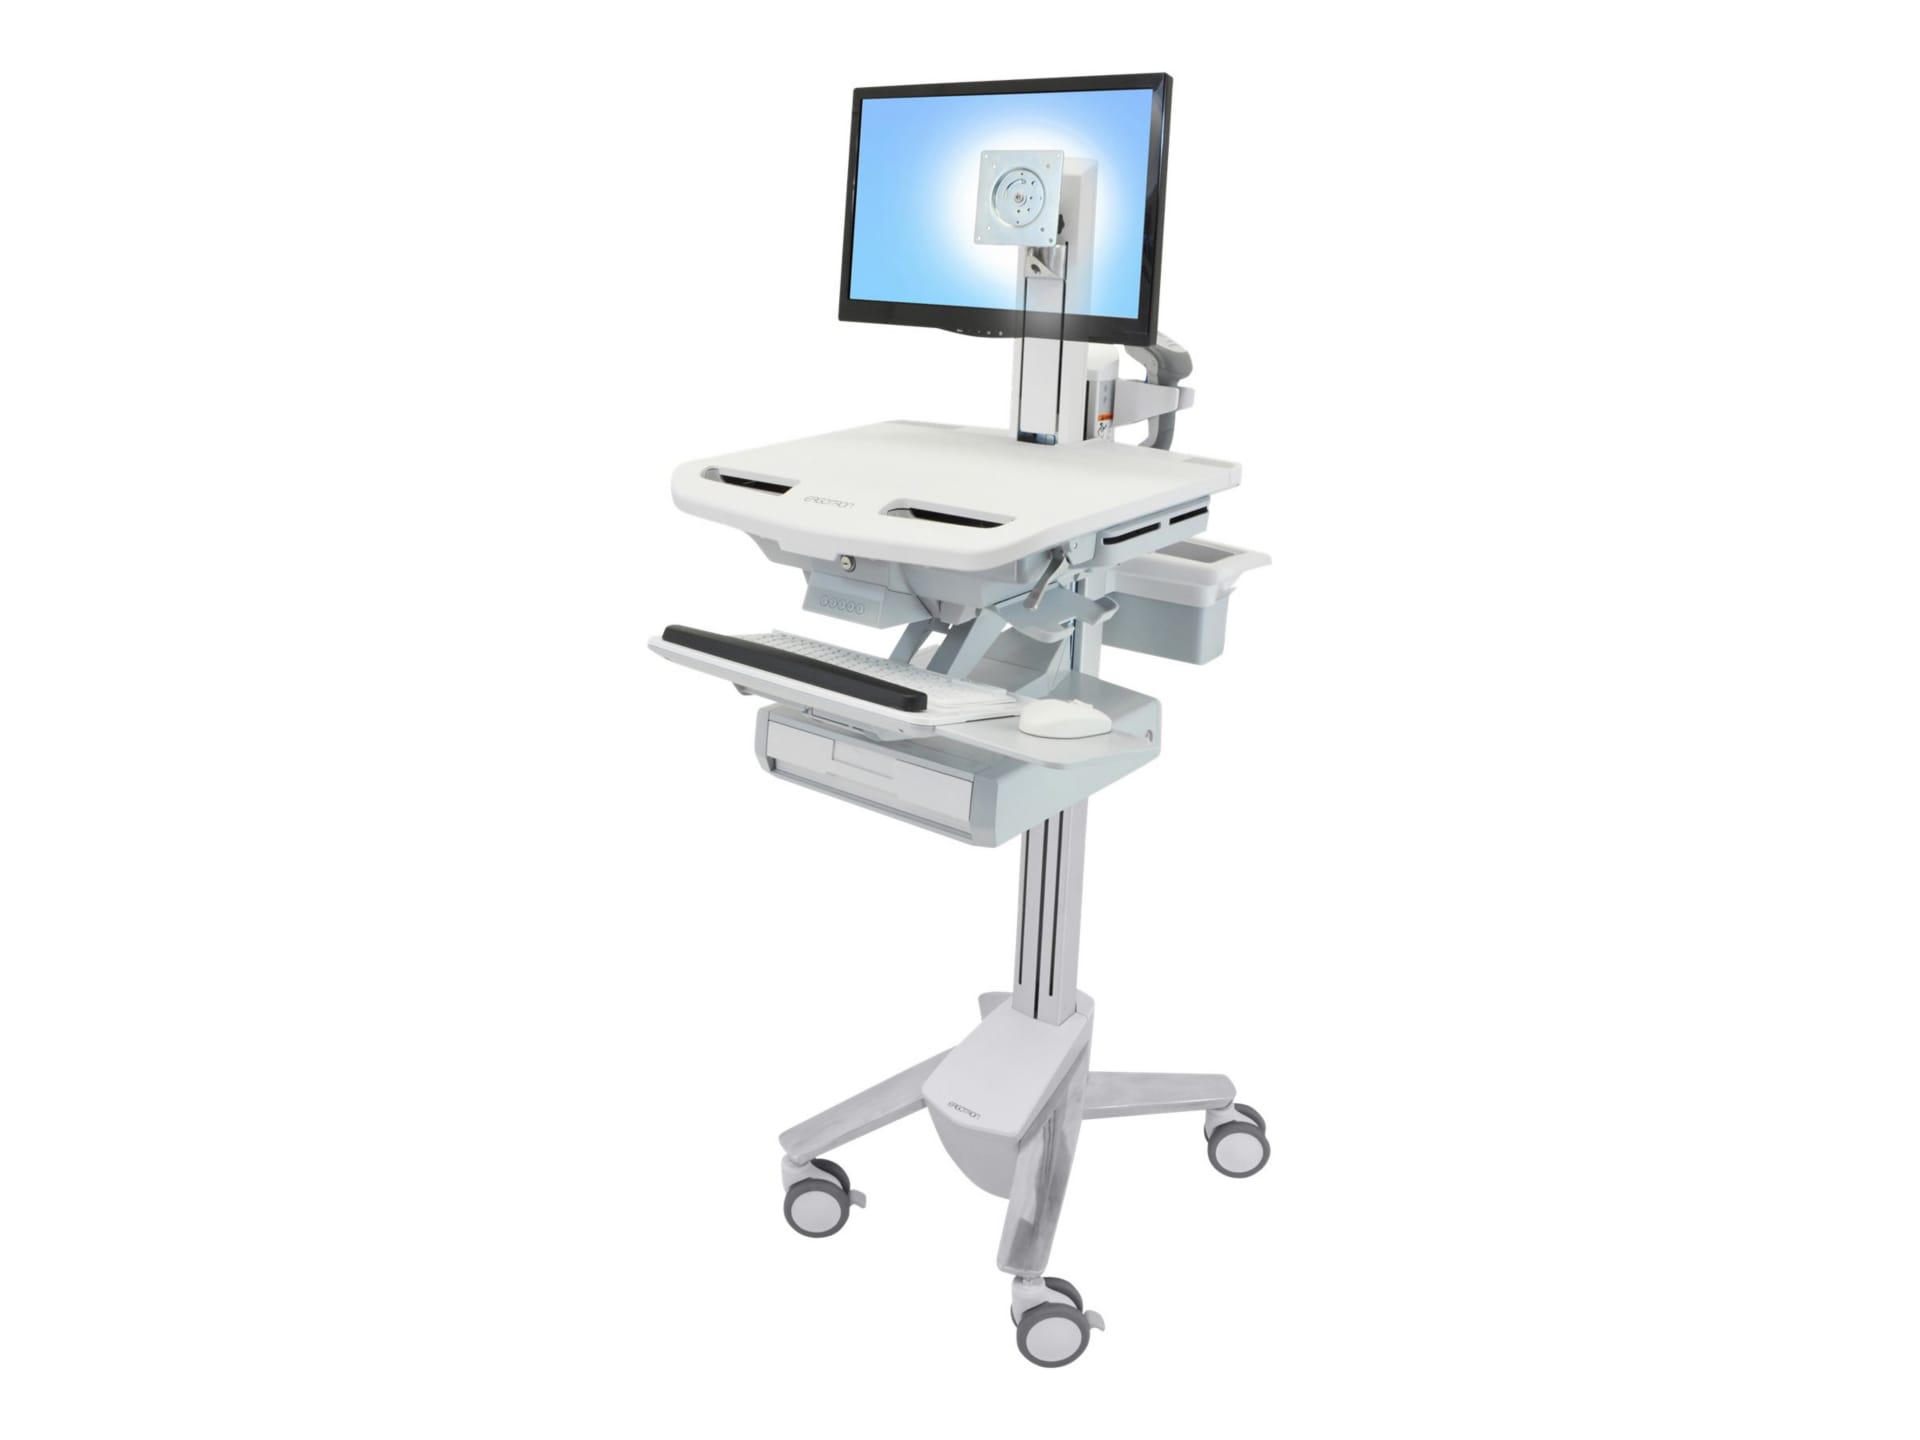 Ergotron StyleView cart - open architecture - for LCD display / keyboard / mouse / CPU / notebook / barcode scanner -